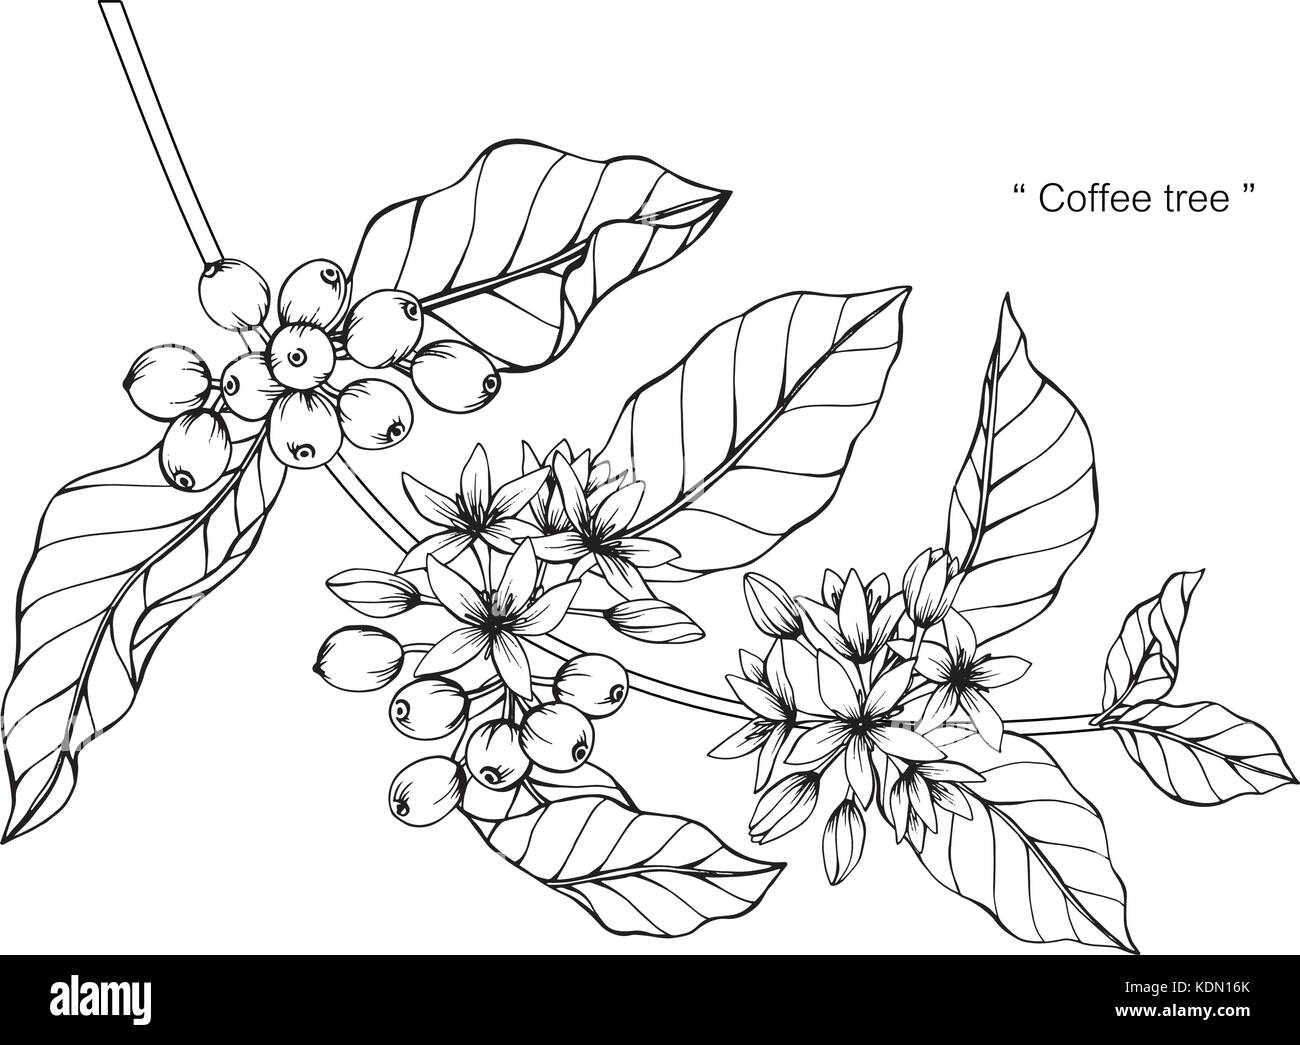 Coffee tree drawing  illustration. Black and white with line art. Stock Vector